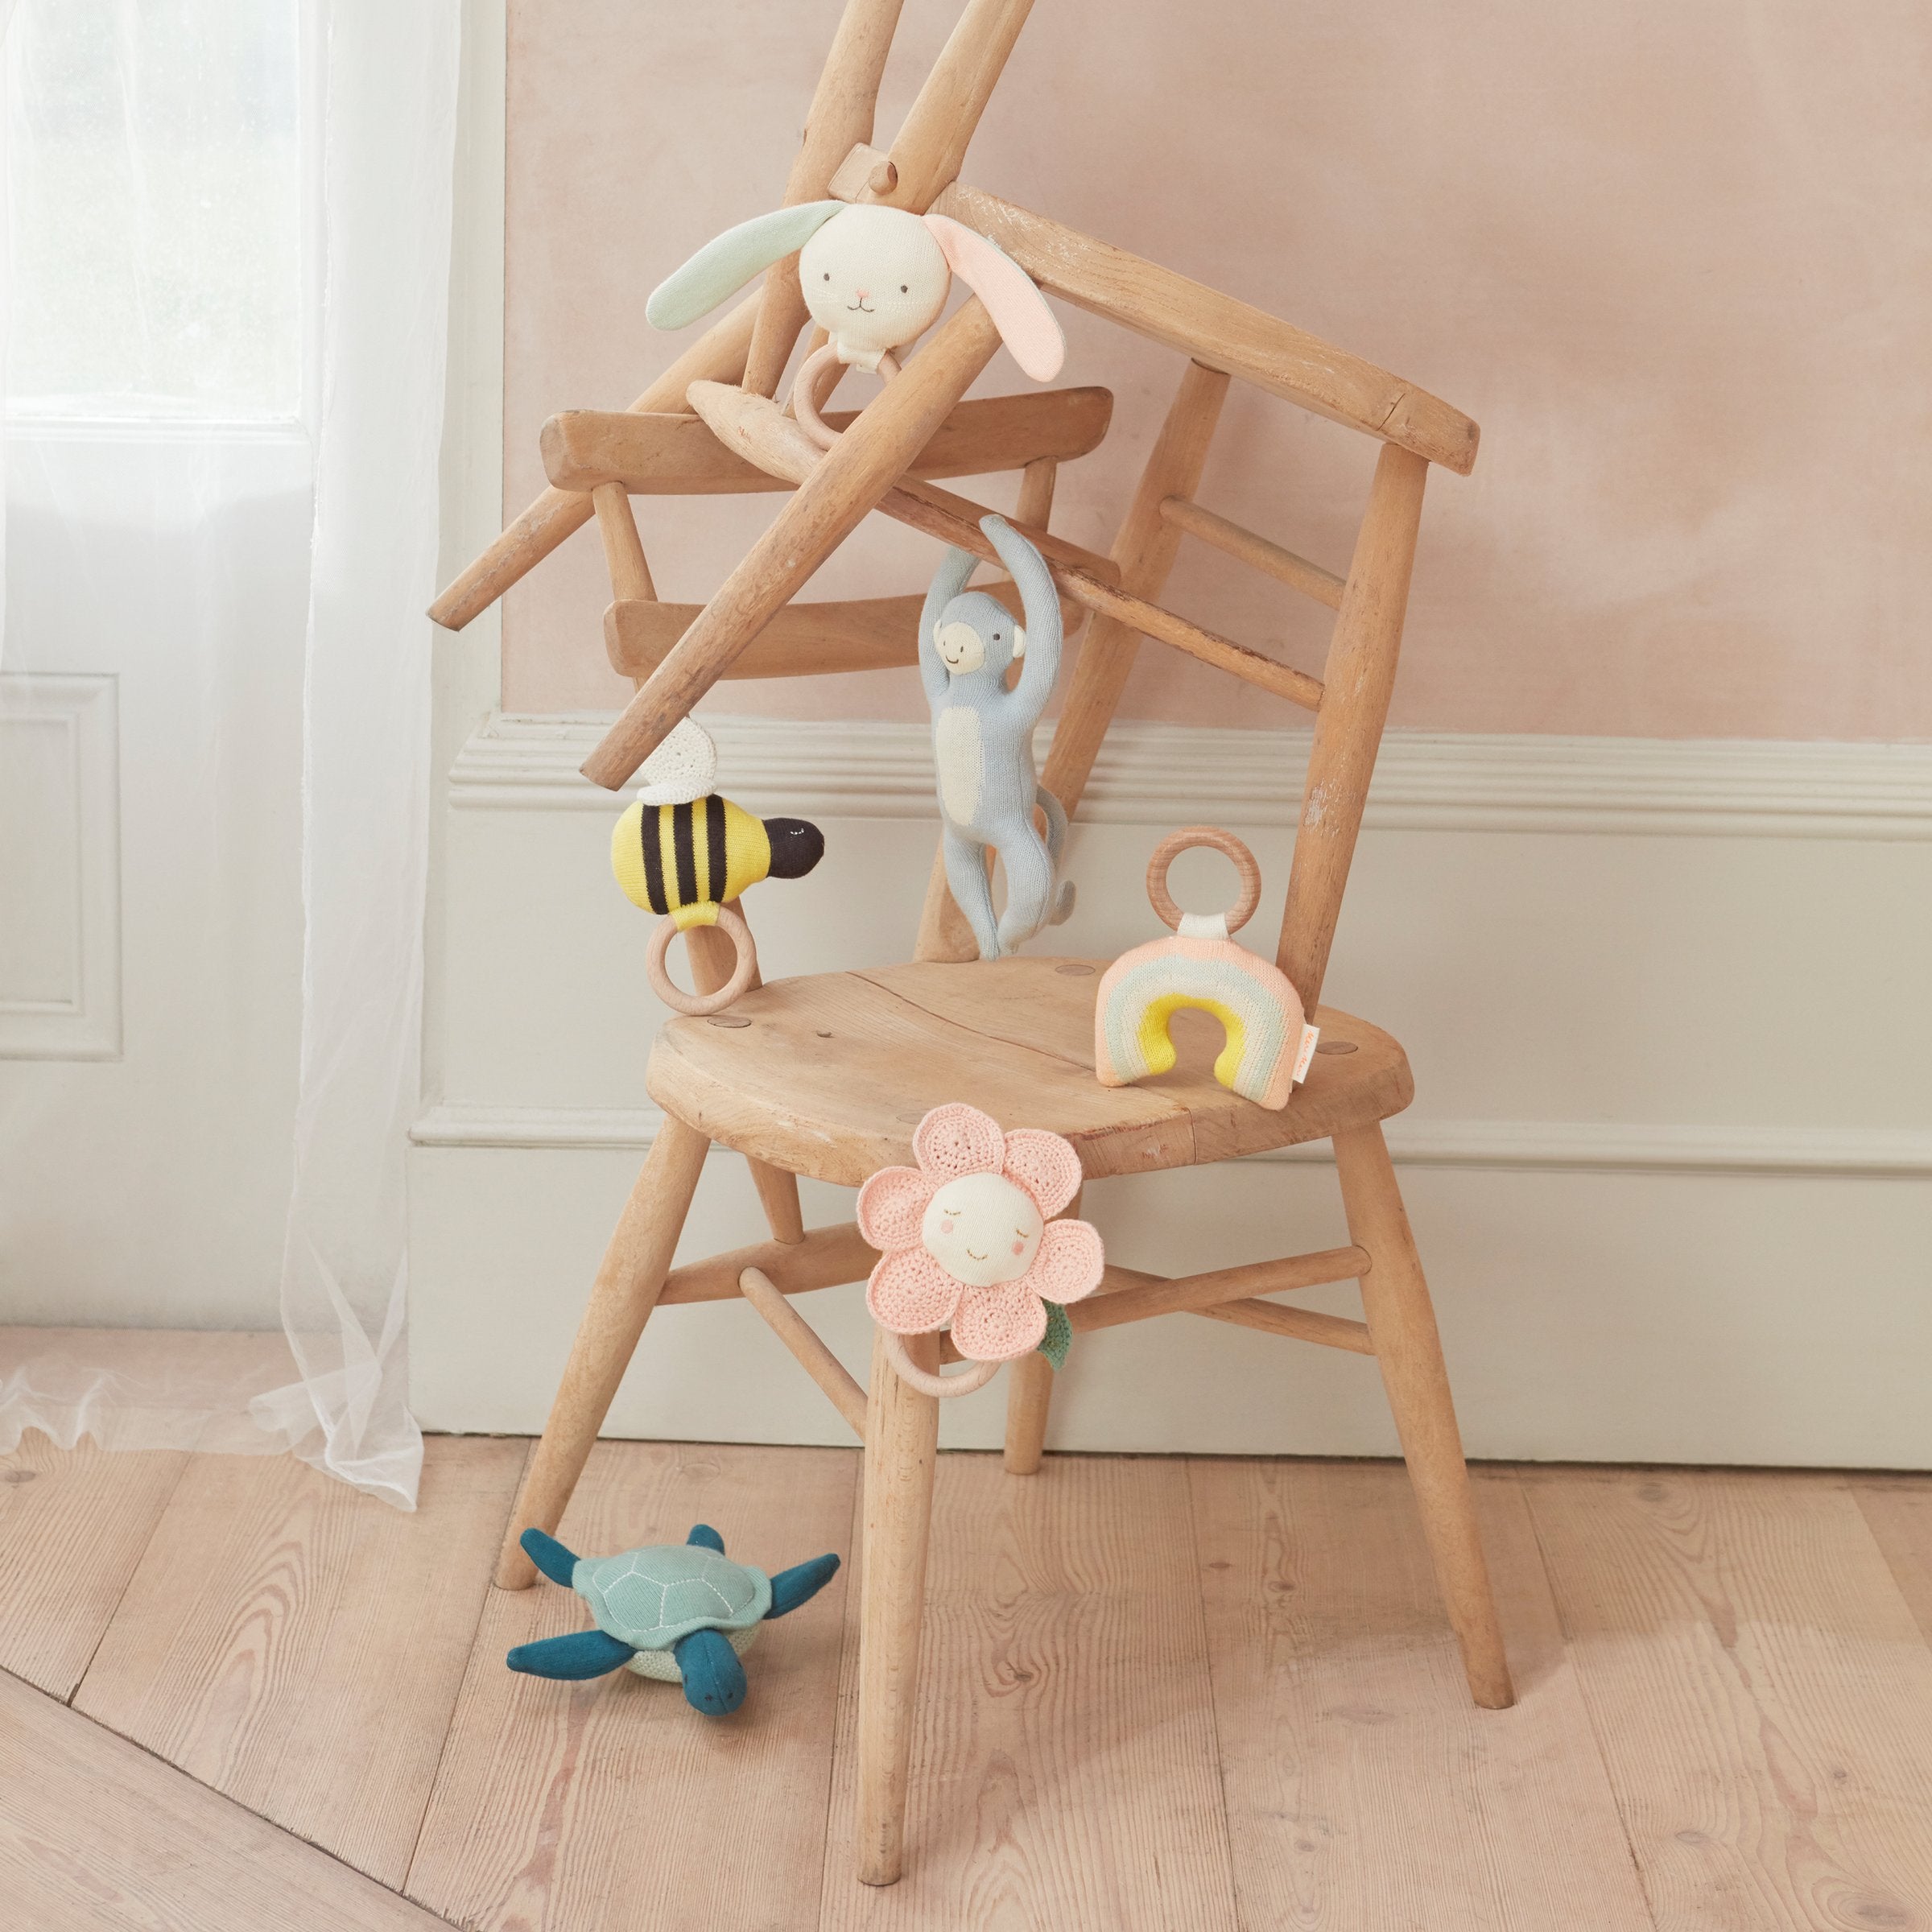 This monkey baby rattle is crafted from organic cotton, perfect as a newborn baby gift.